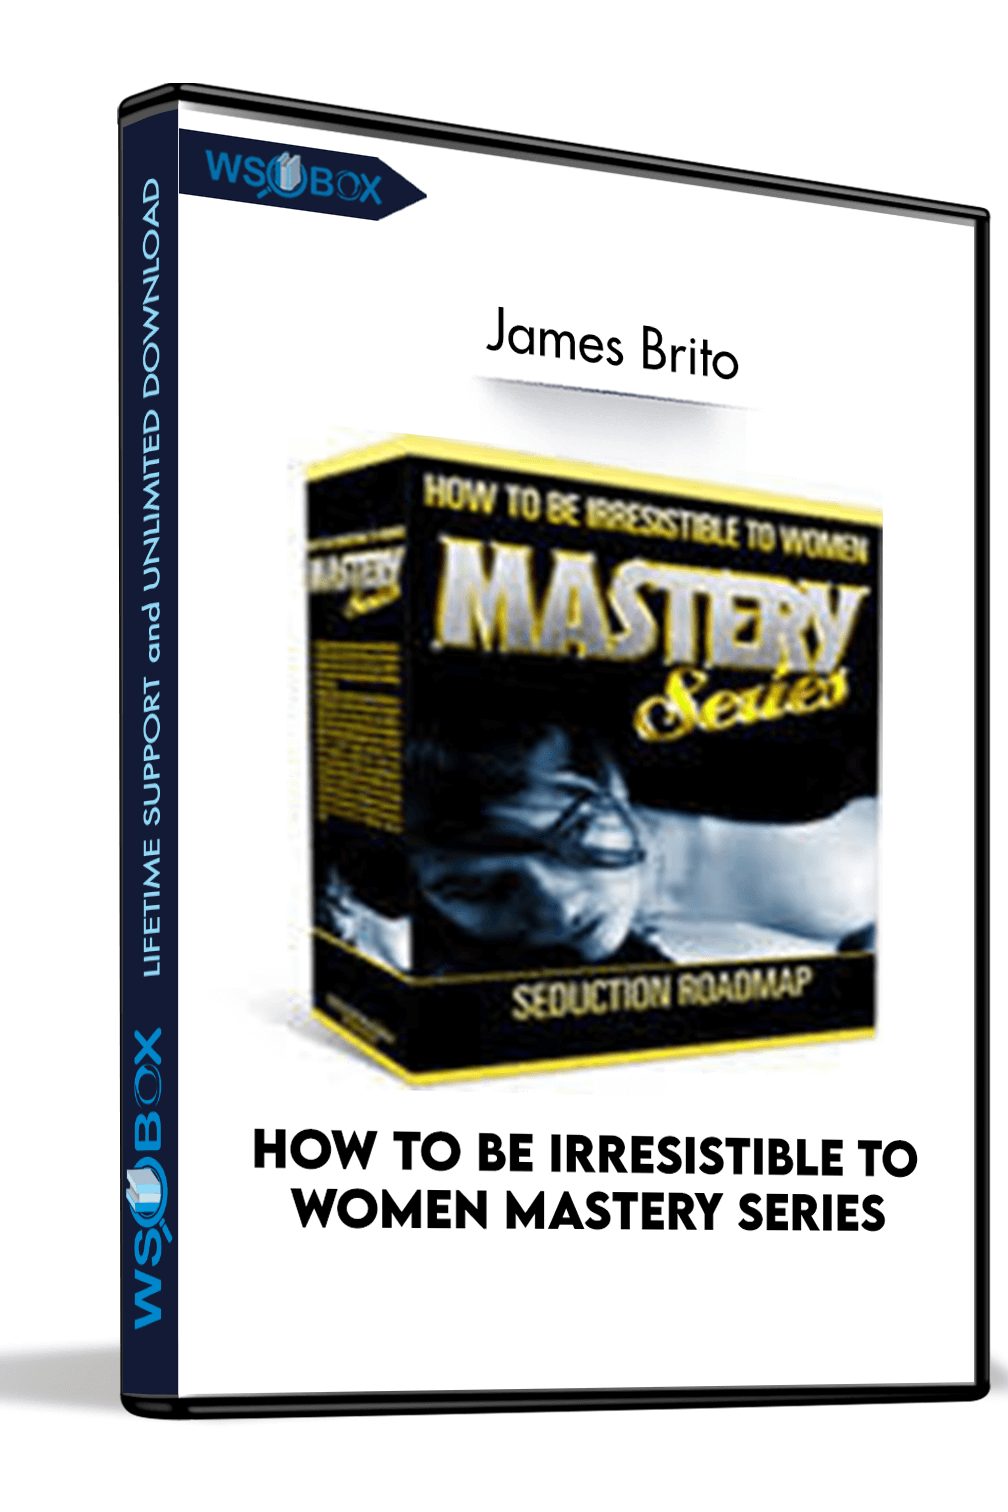 how-to-be-irresistible-to-women-mastery-series-james-brito